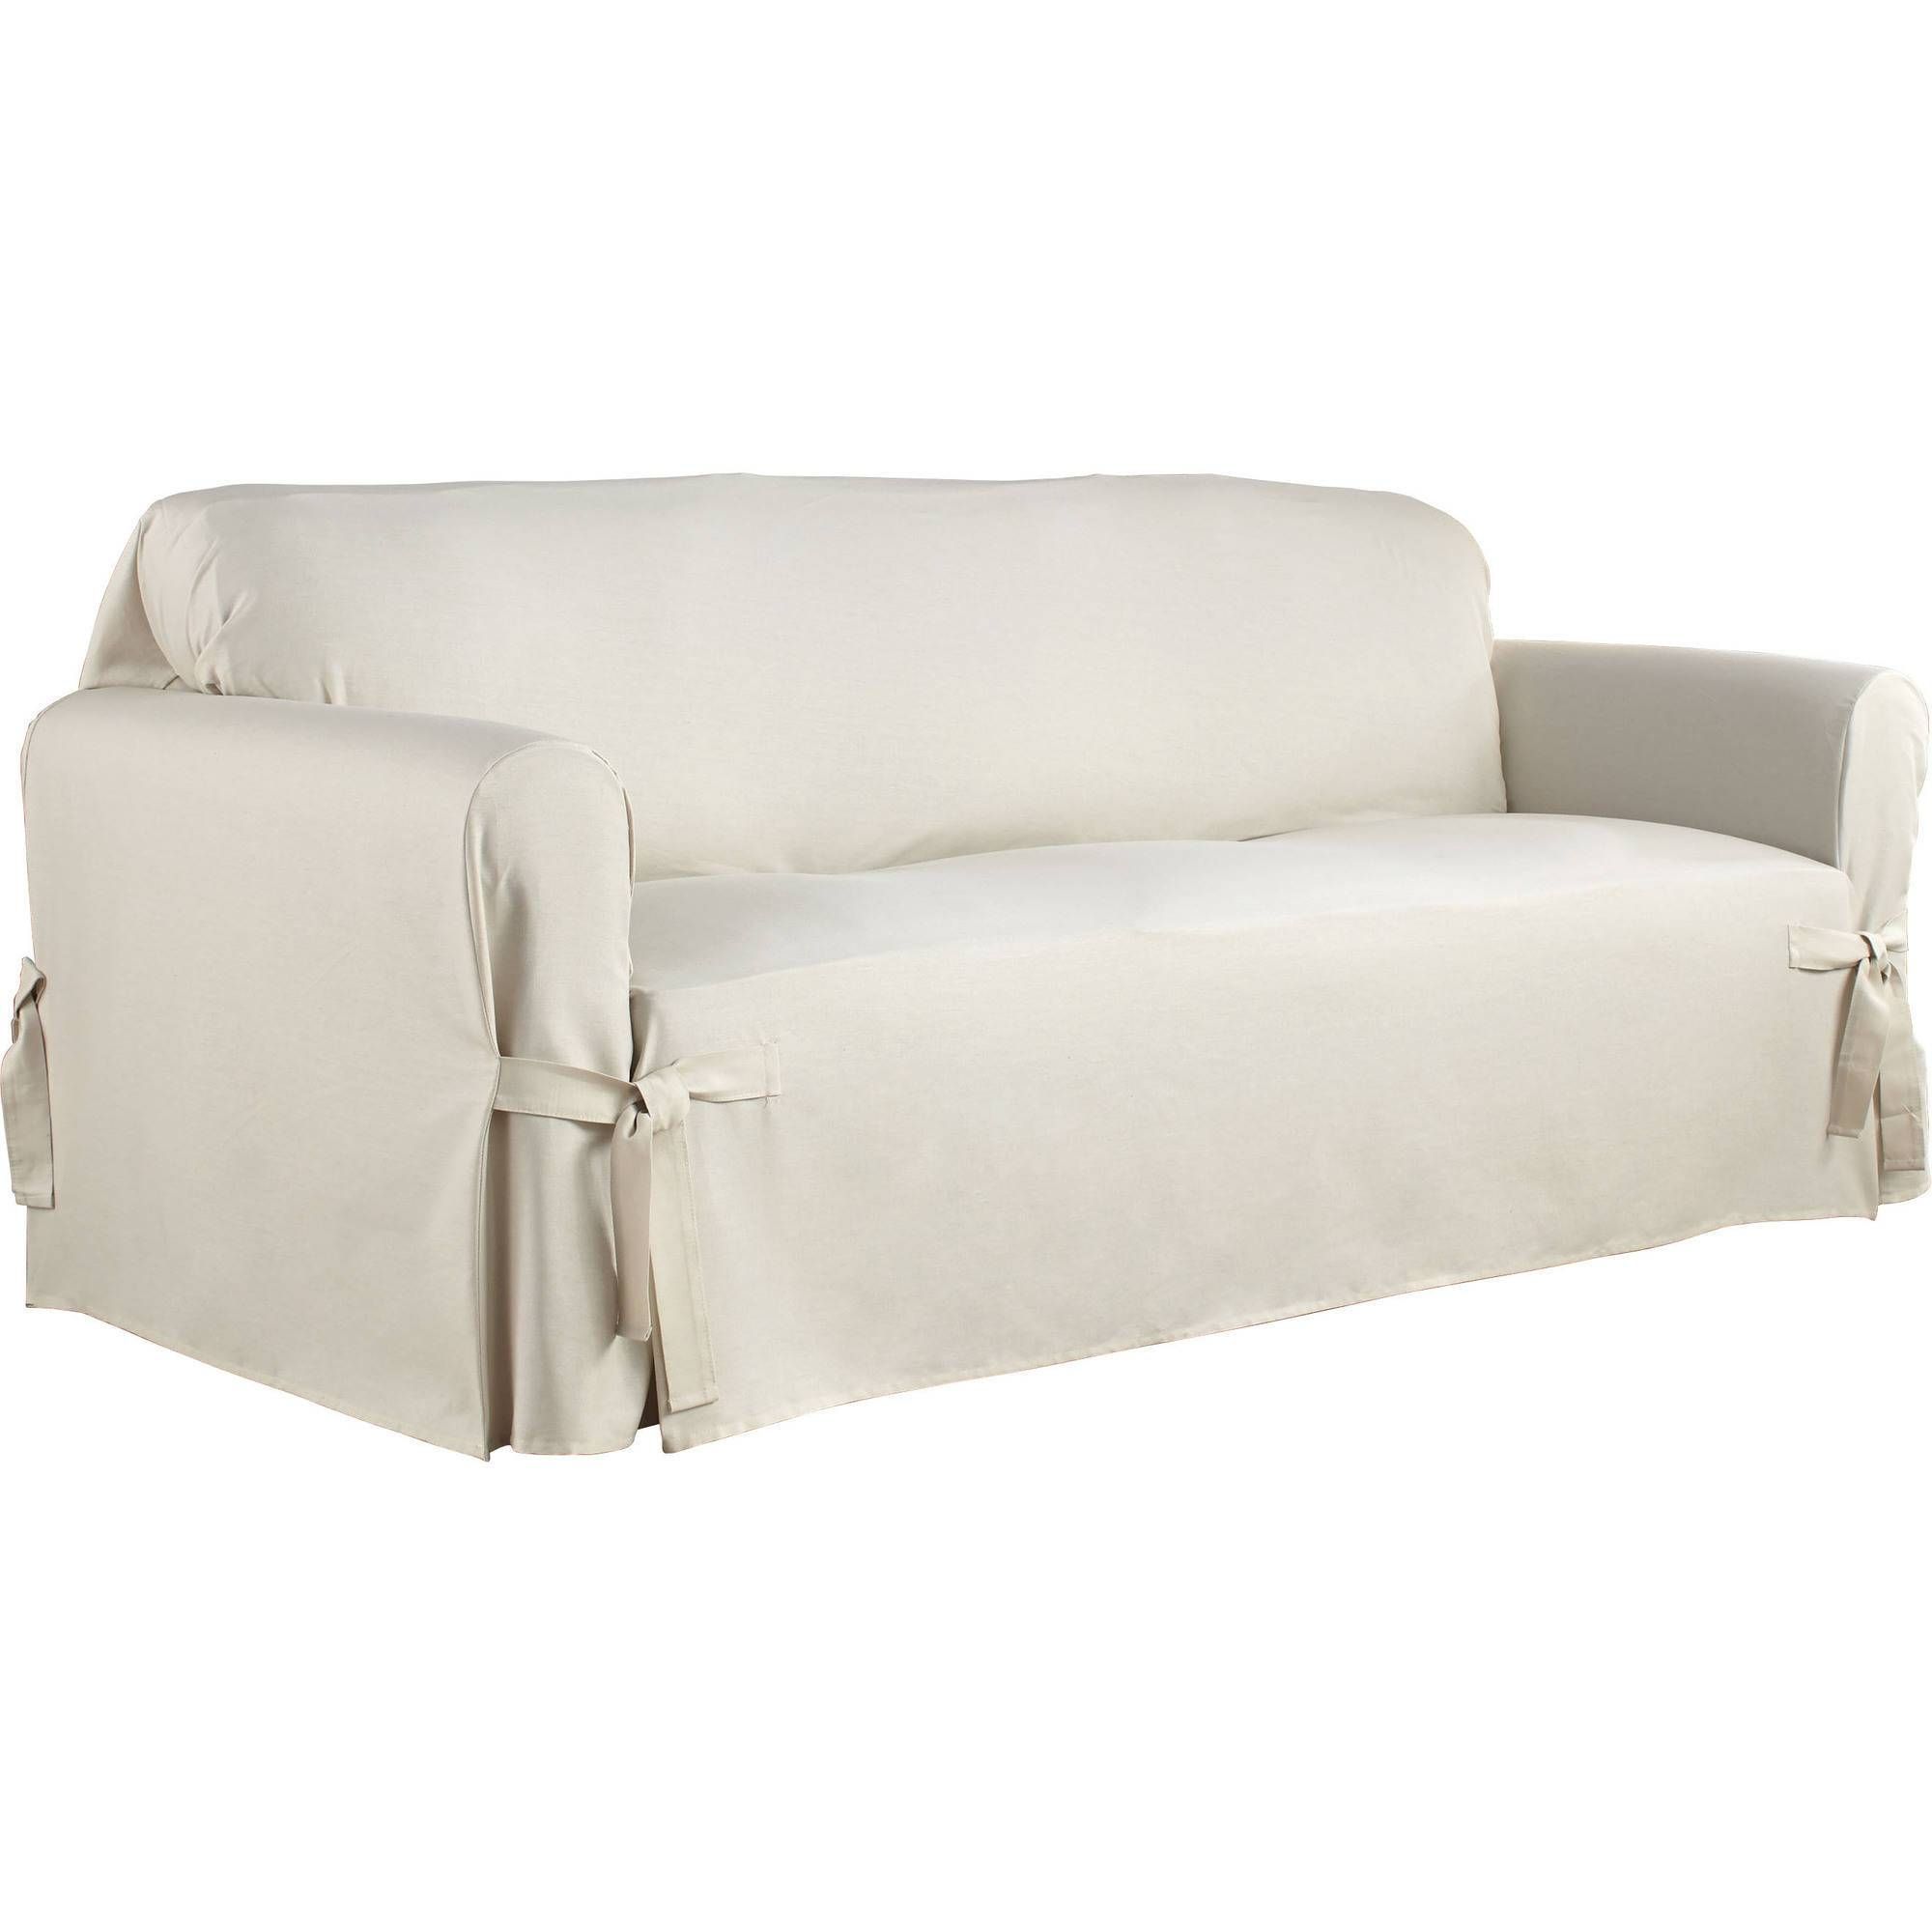 Serta Relaxed Fit Duck Furniture Slipcover, Sofa 1 Piece Box Intended For Walmart Slipcovers For Sofas (Photo 23 of 30)